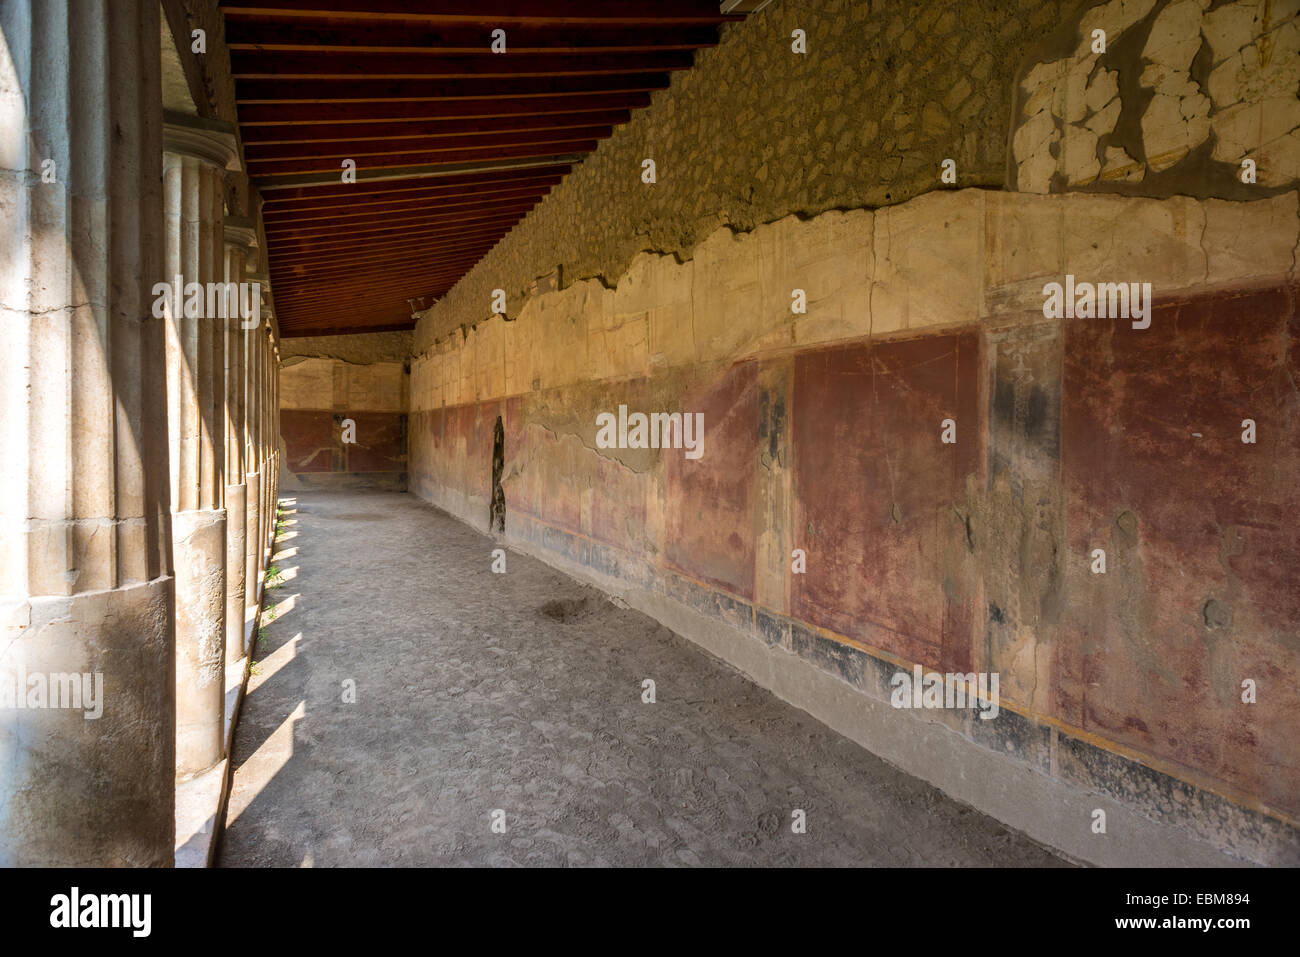 The excavated Roman Villa Poppaea, in Oplontis, near Pompeii in Italy, destroyed by the eruption of Vesuvius in 79AD. Stock Photo